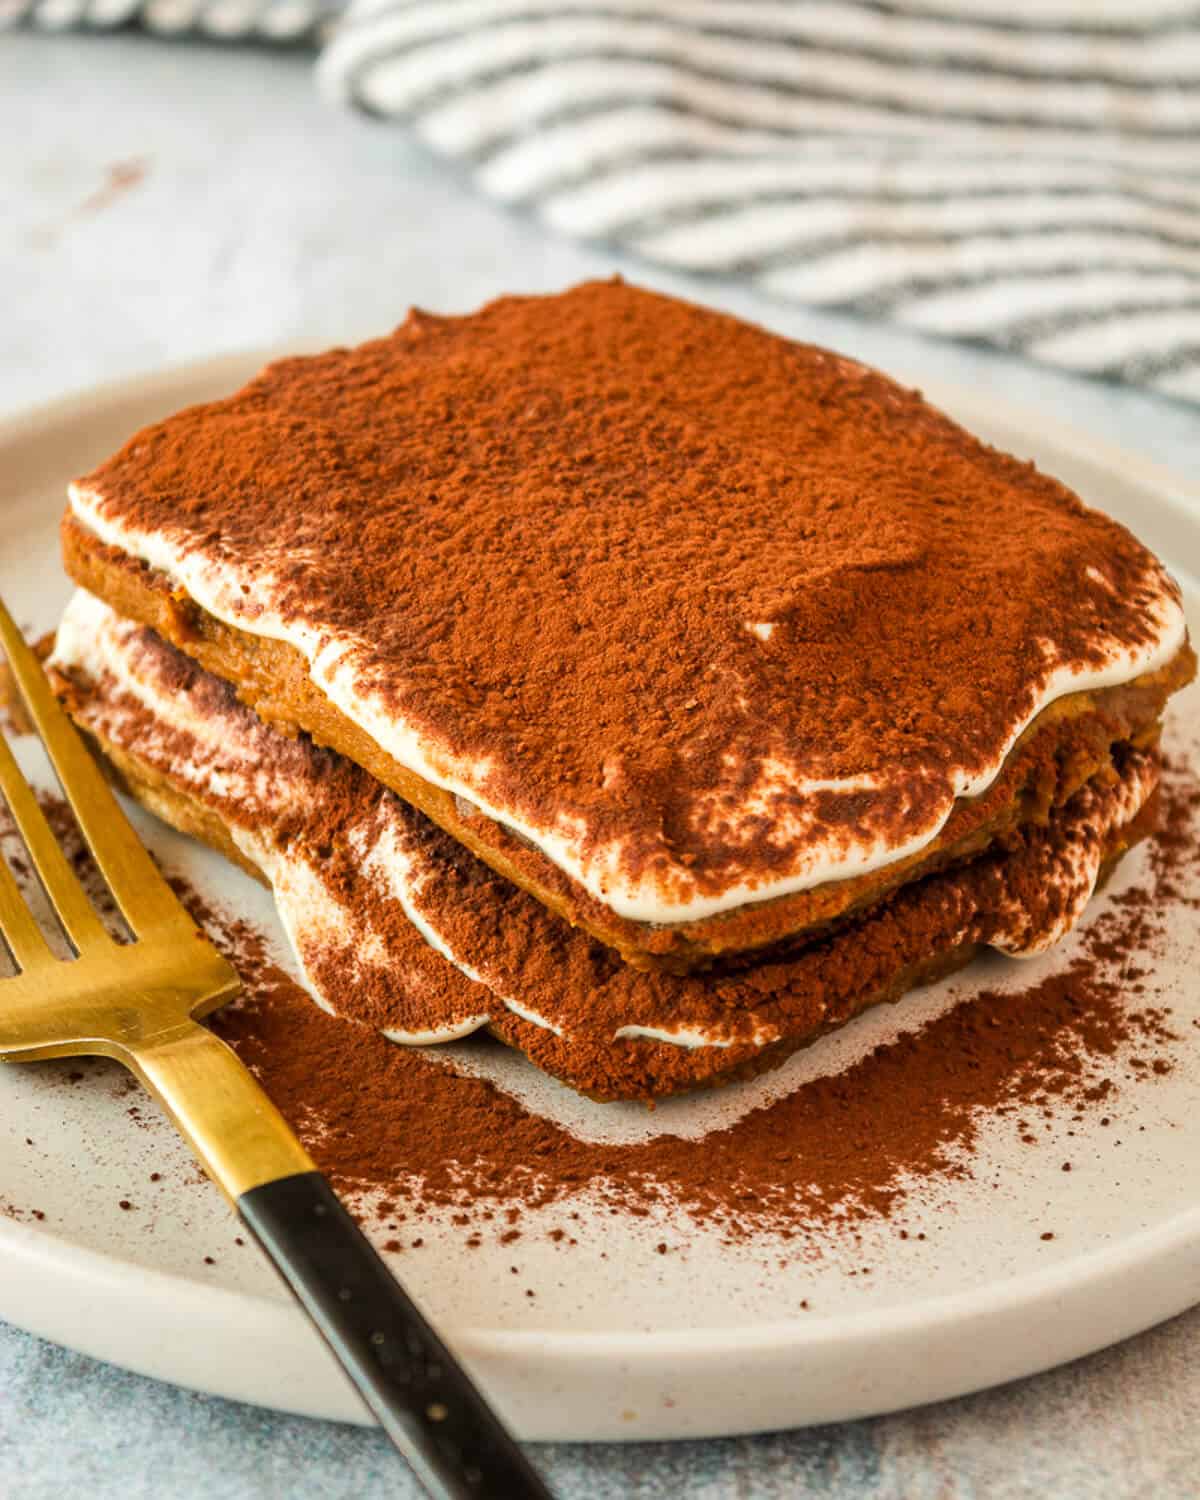 A single serving of tiramisu on a grey plate. There is a fork to the left of the tiramisu.